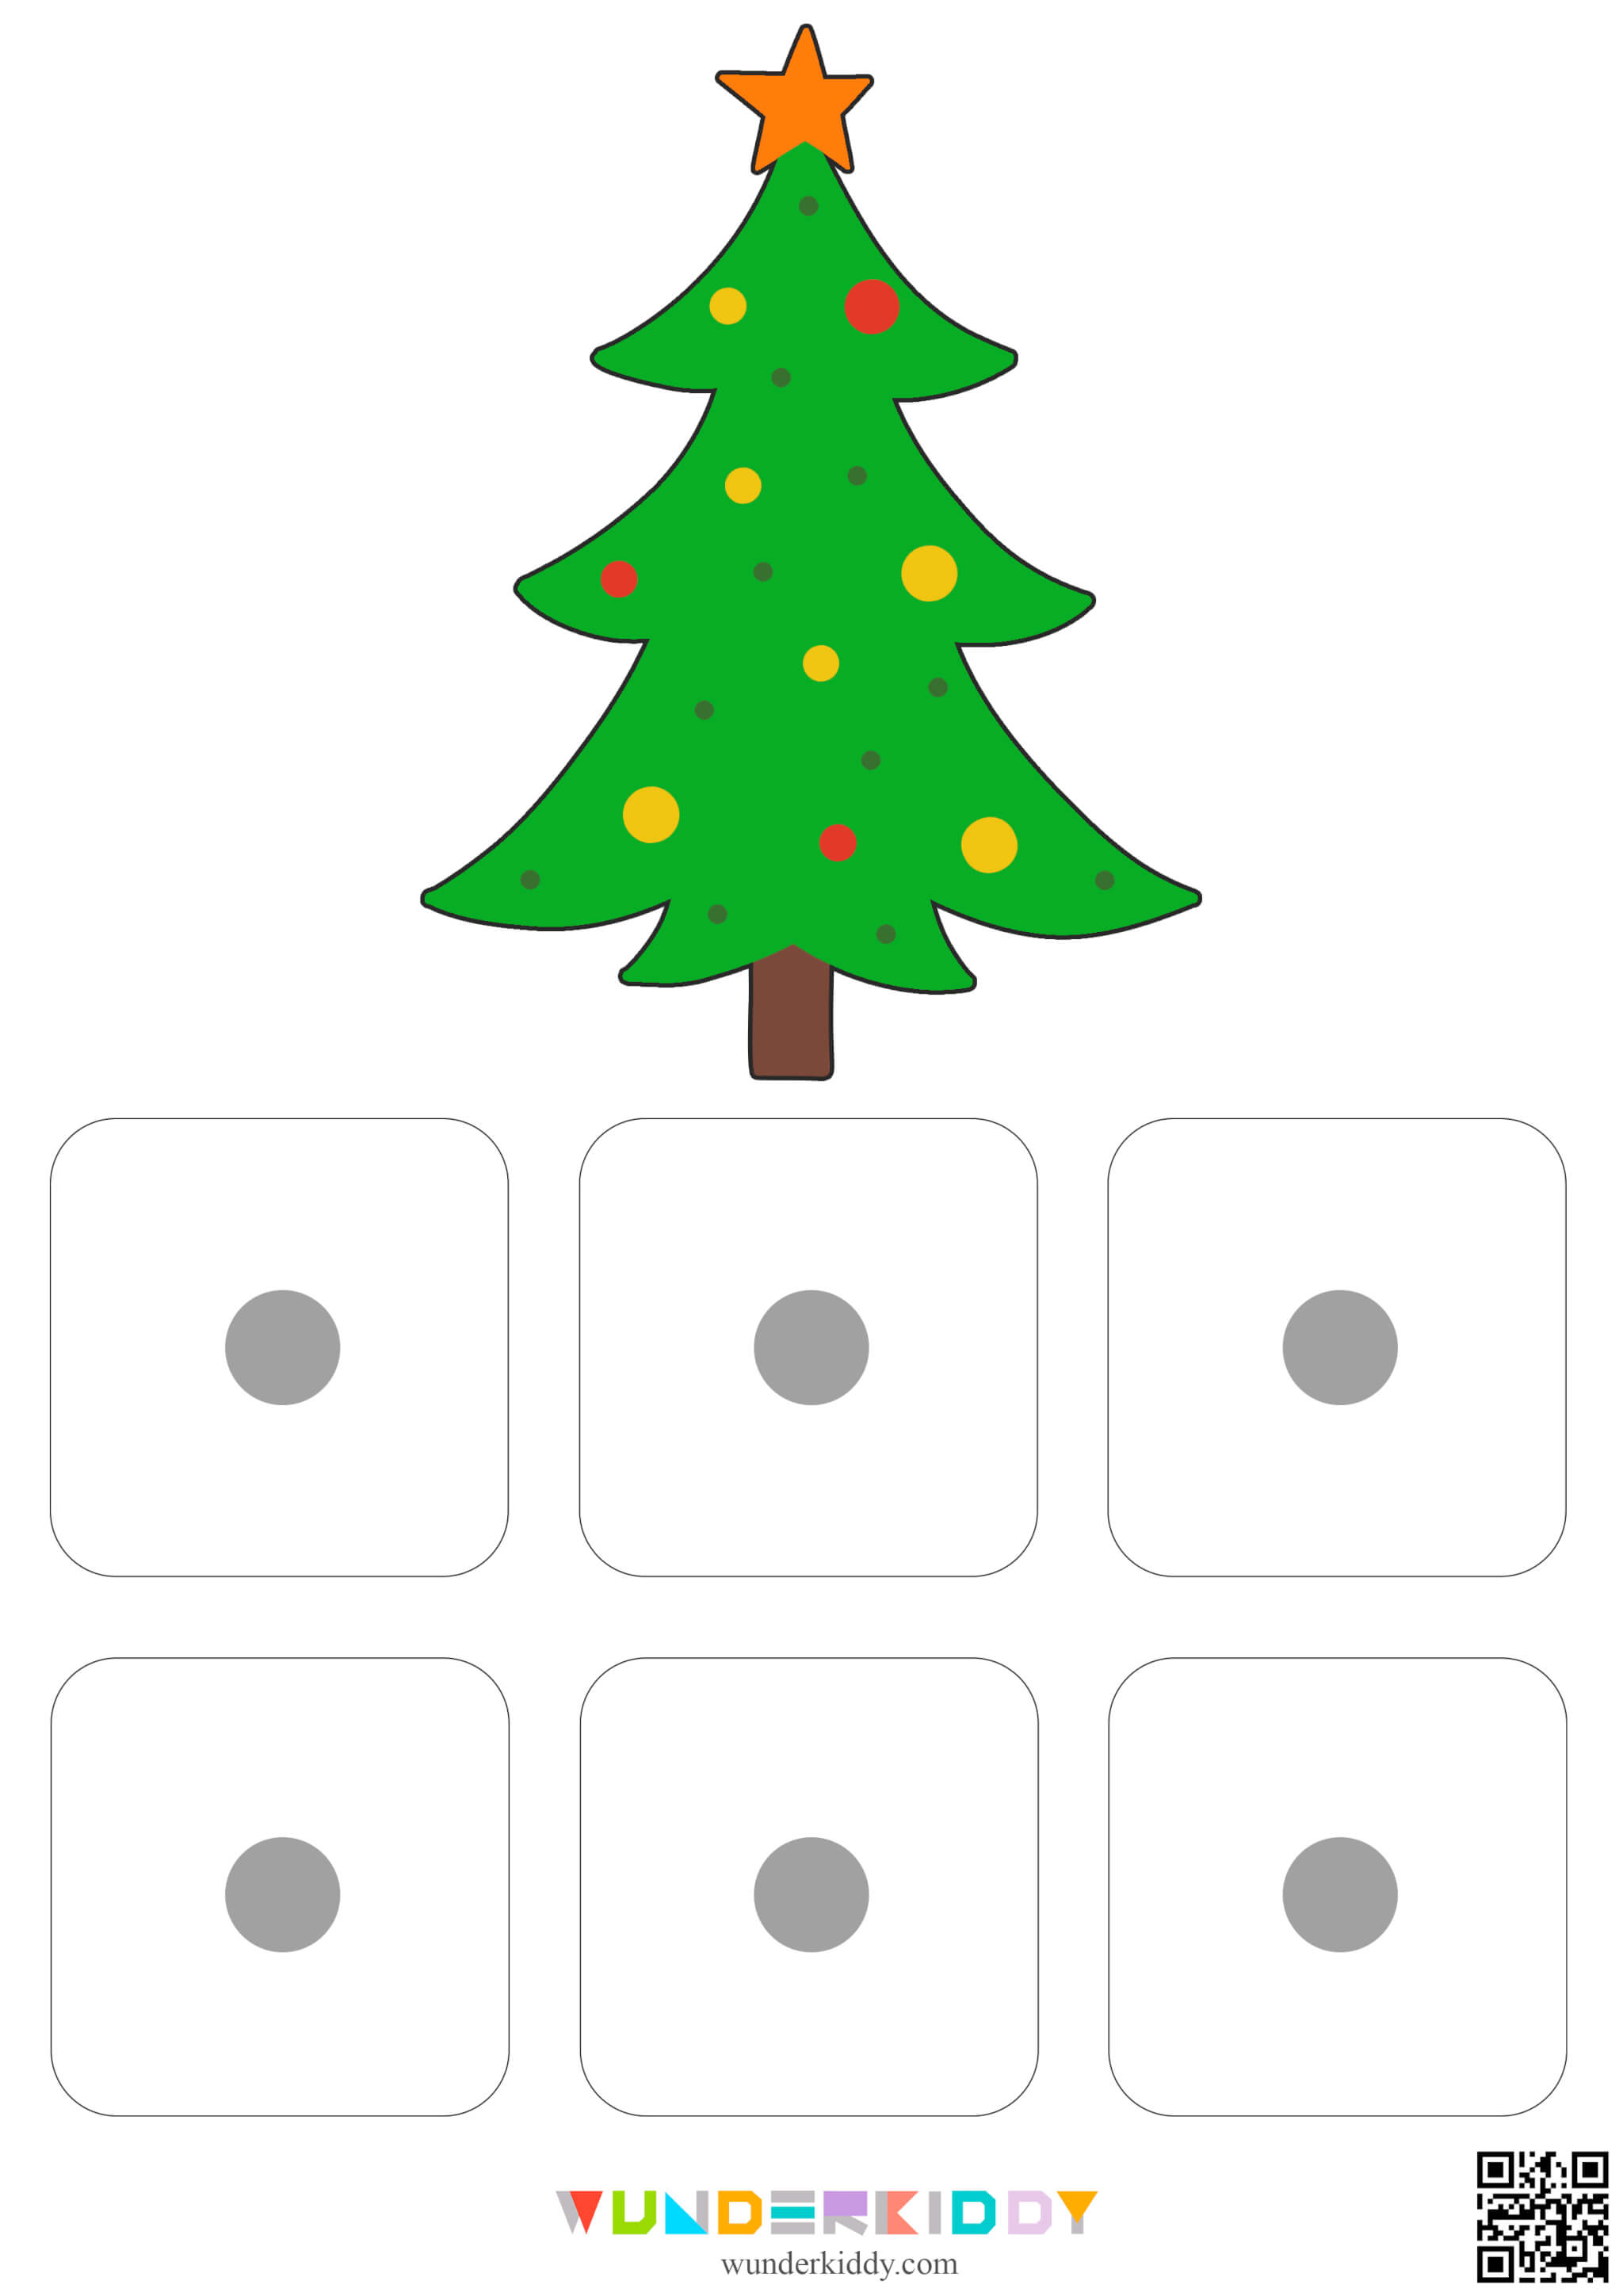 Christmas Color Sorting Activity - Image 2